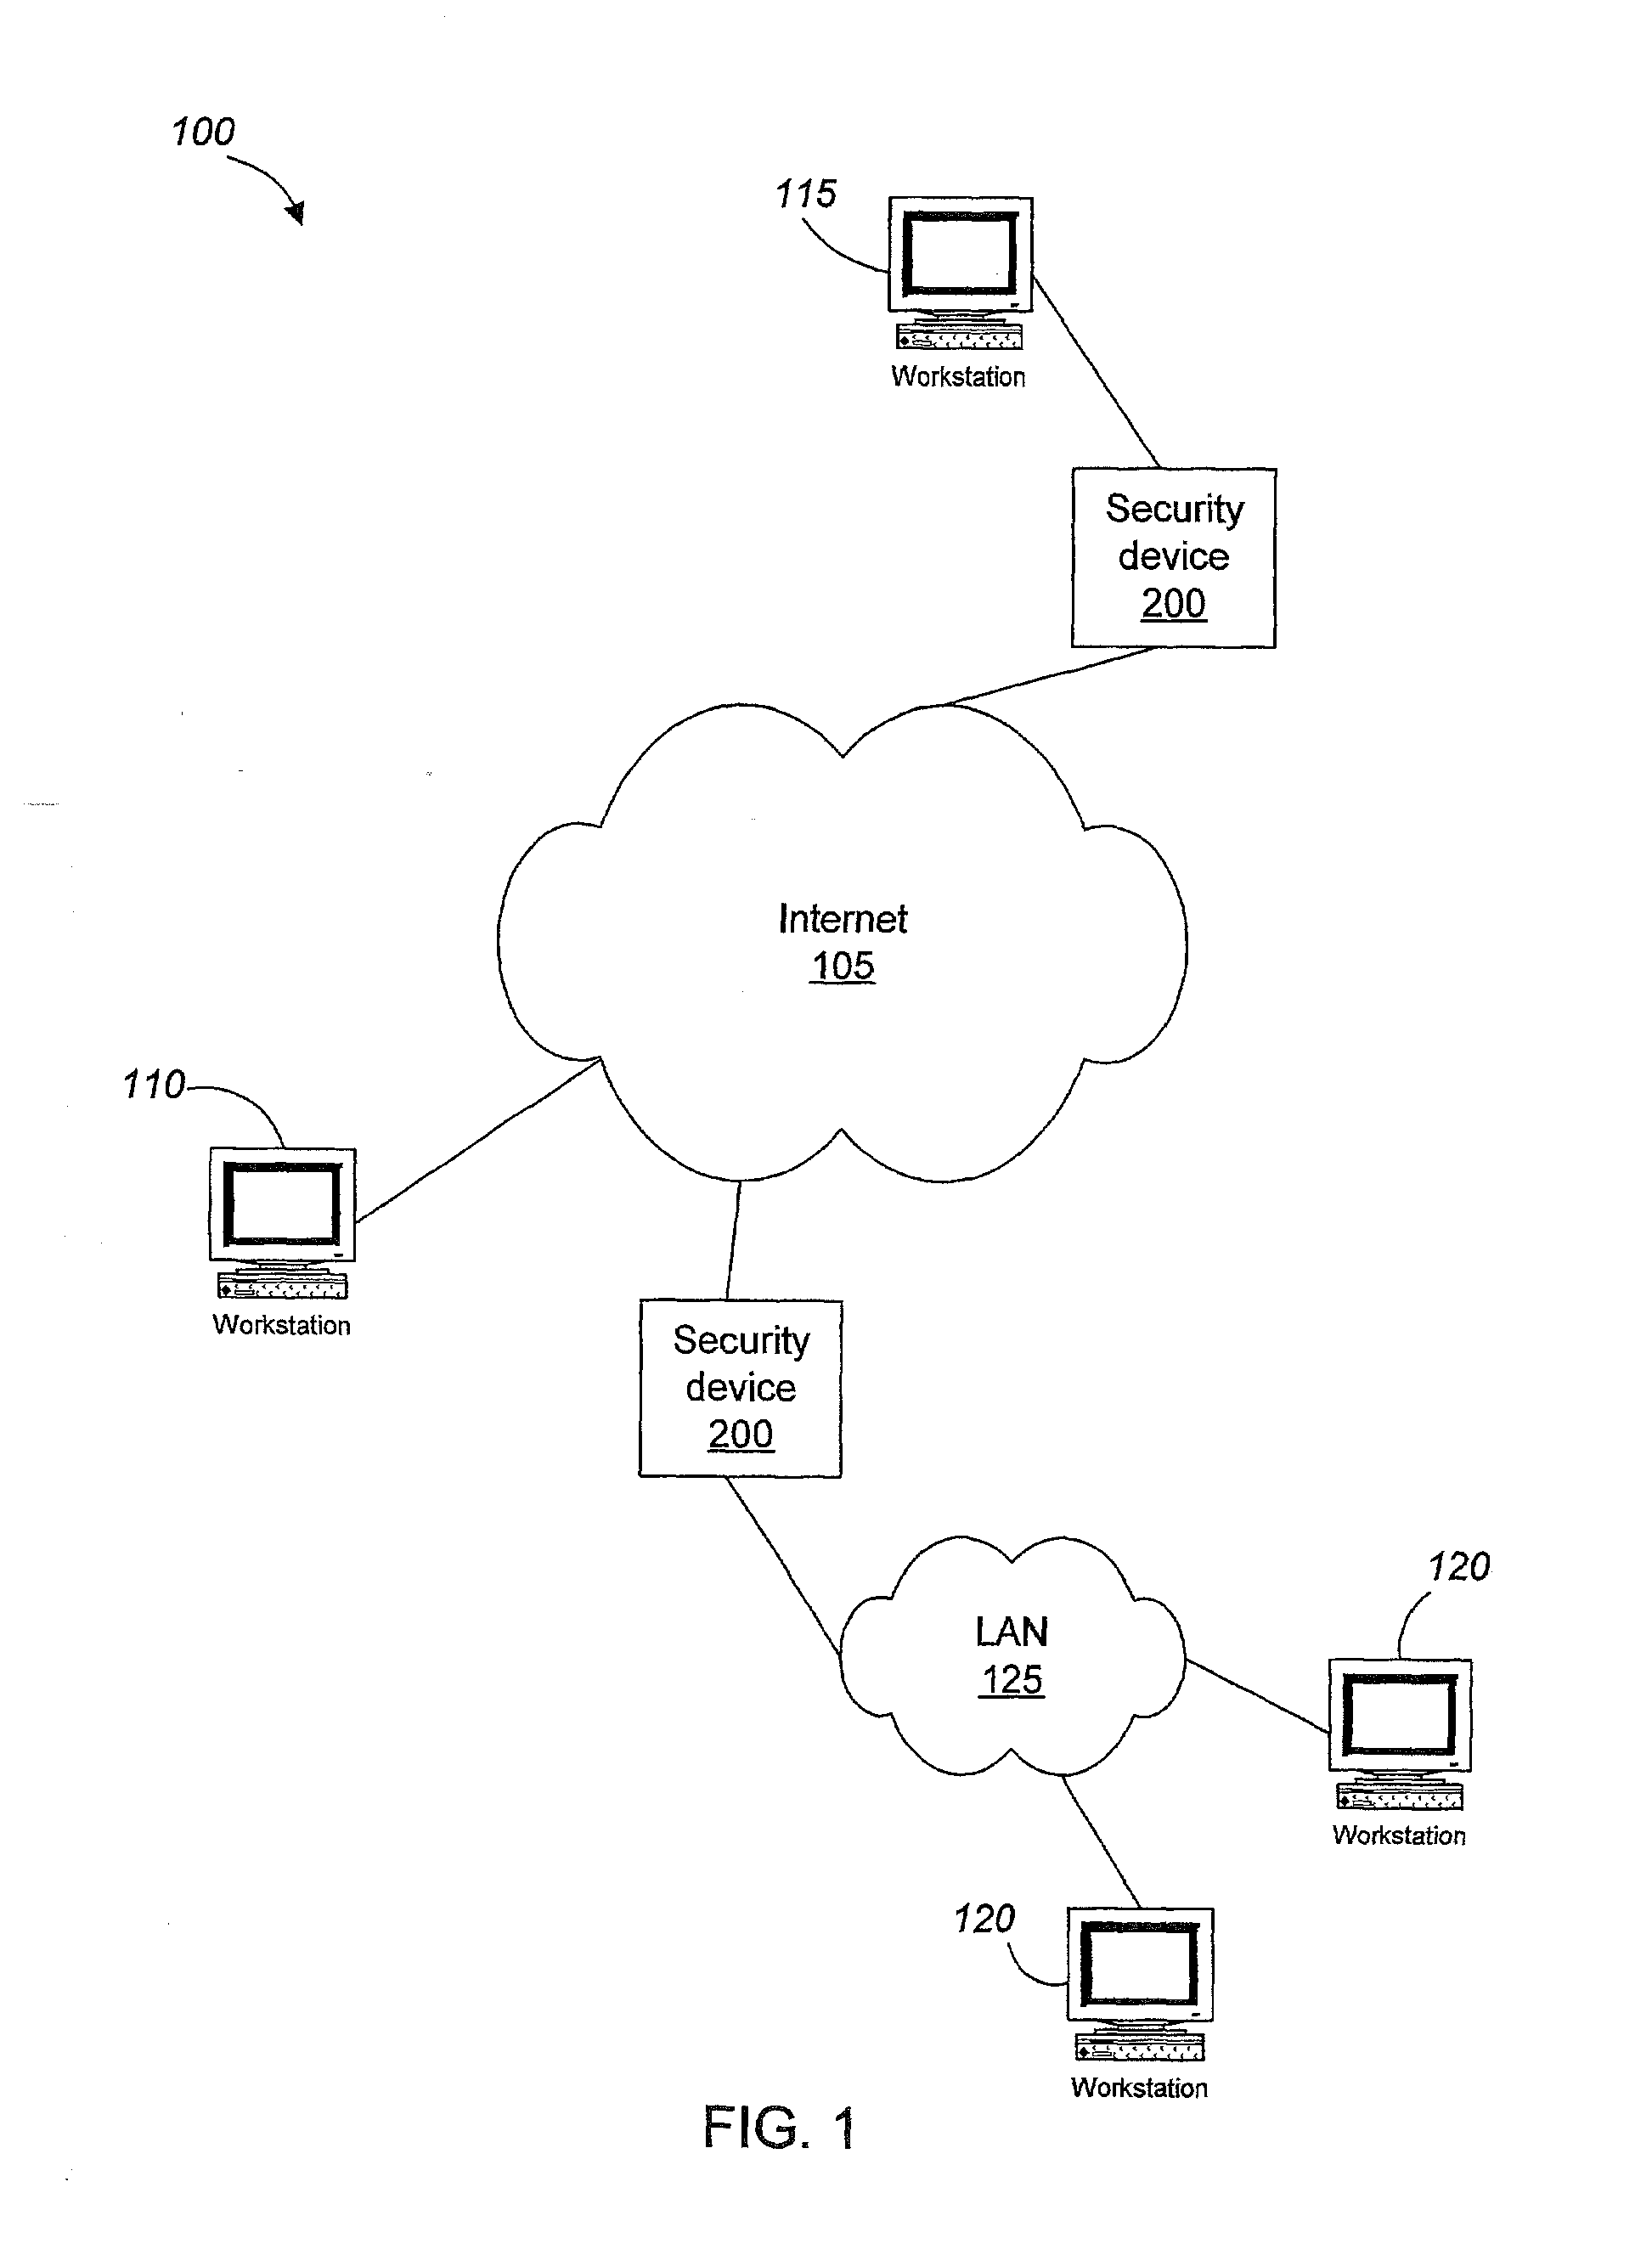 Network security device